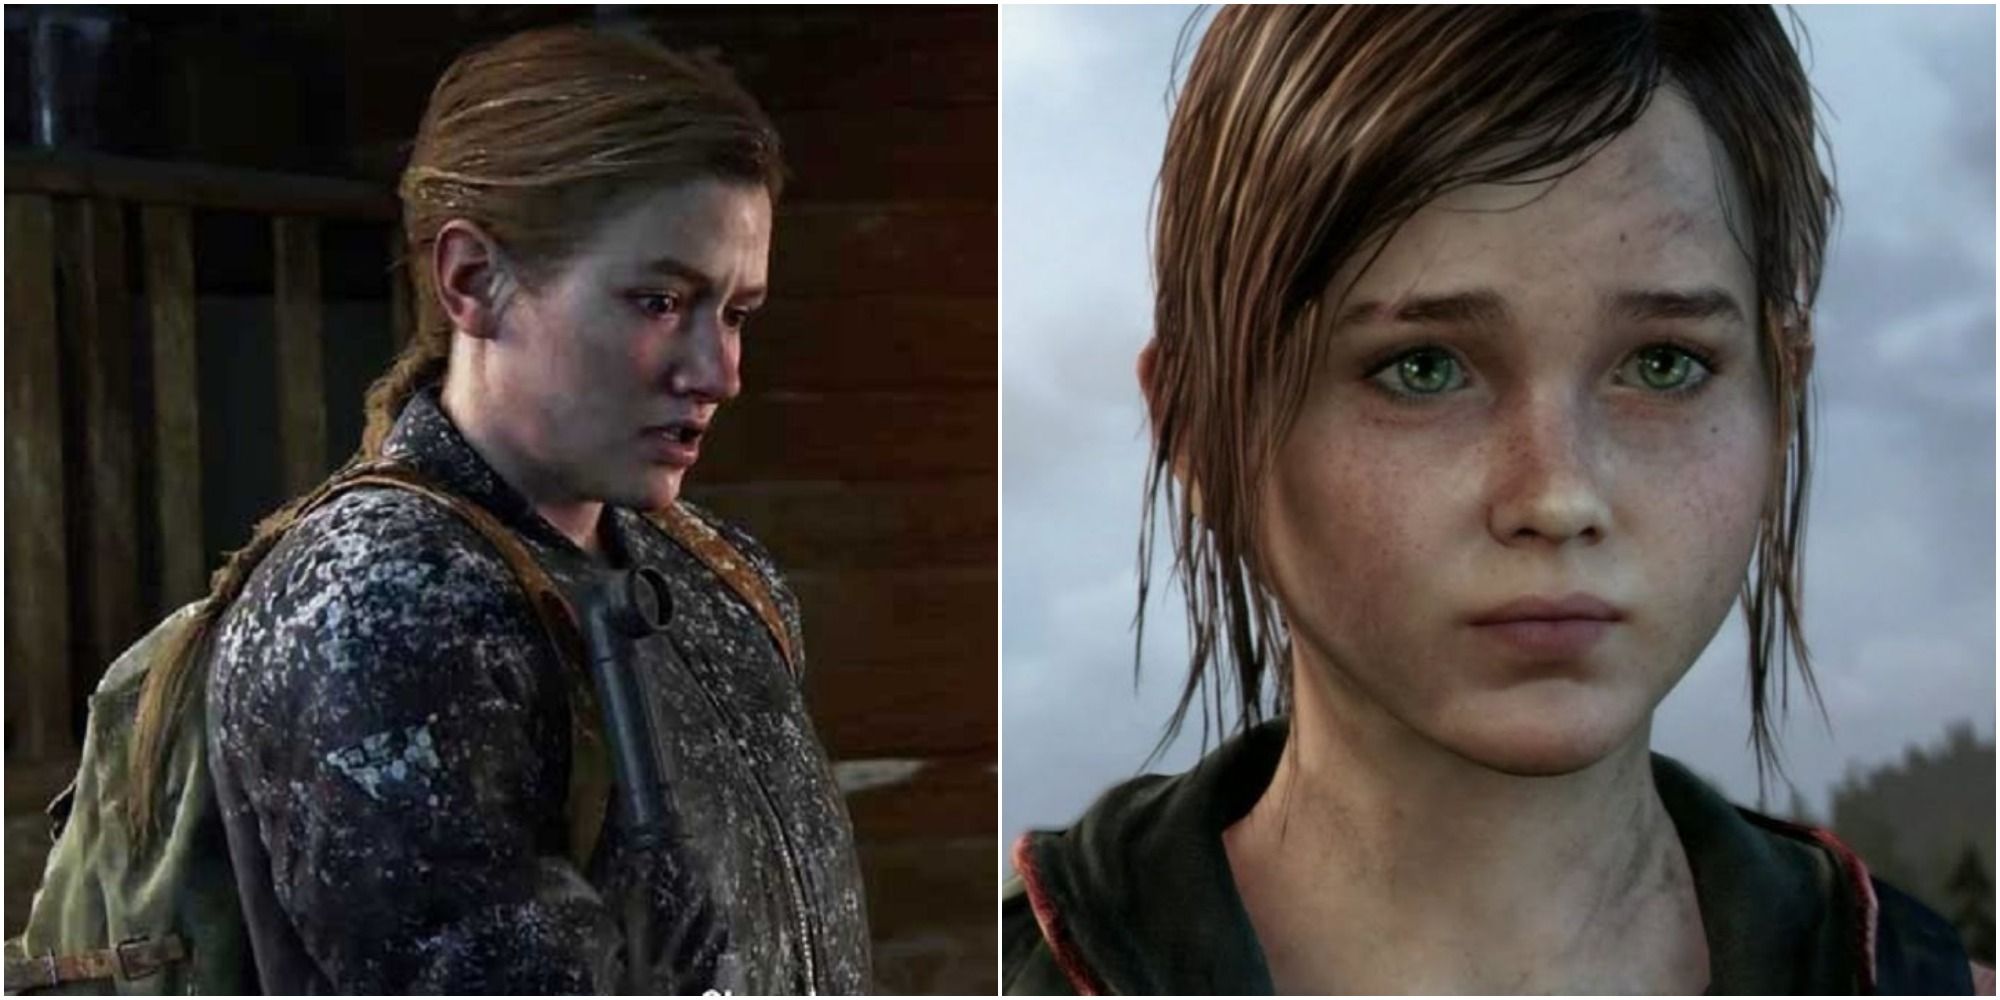 the-last-of-us-2-5-similarities-that-ellie-and-abby-have-and-5-differences